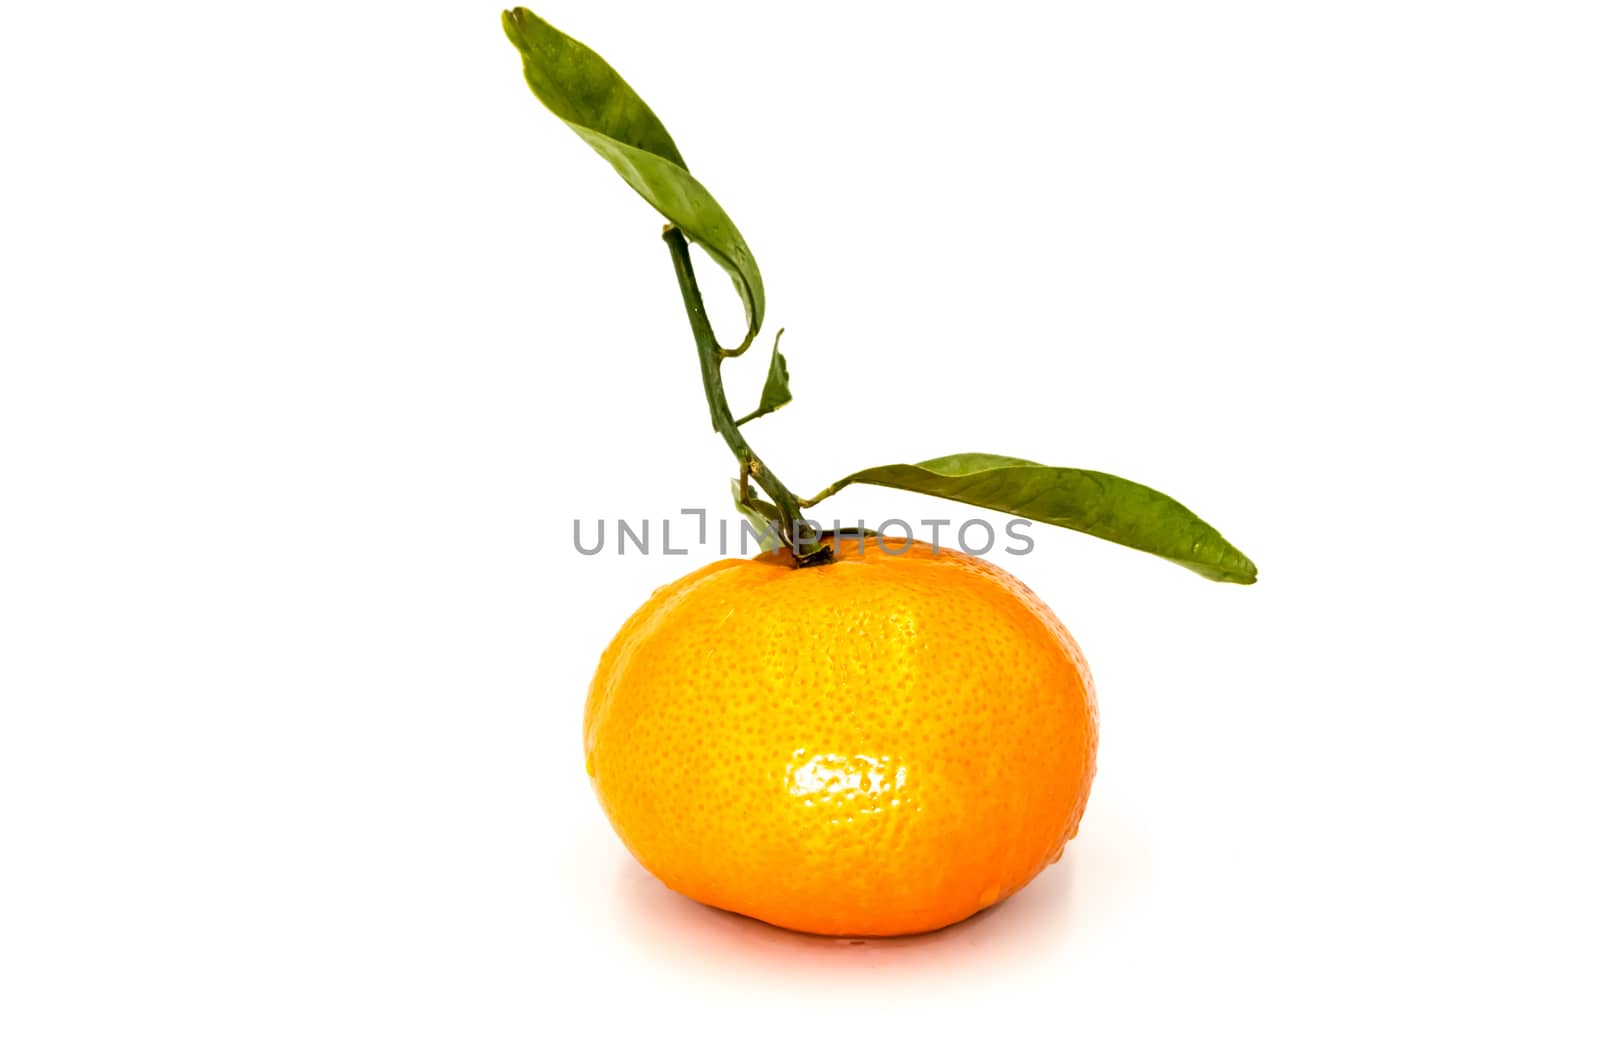 Ripe tangerine with leaves close-up on white background.  by Philou1000